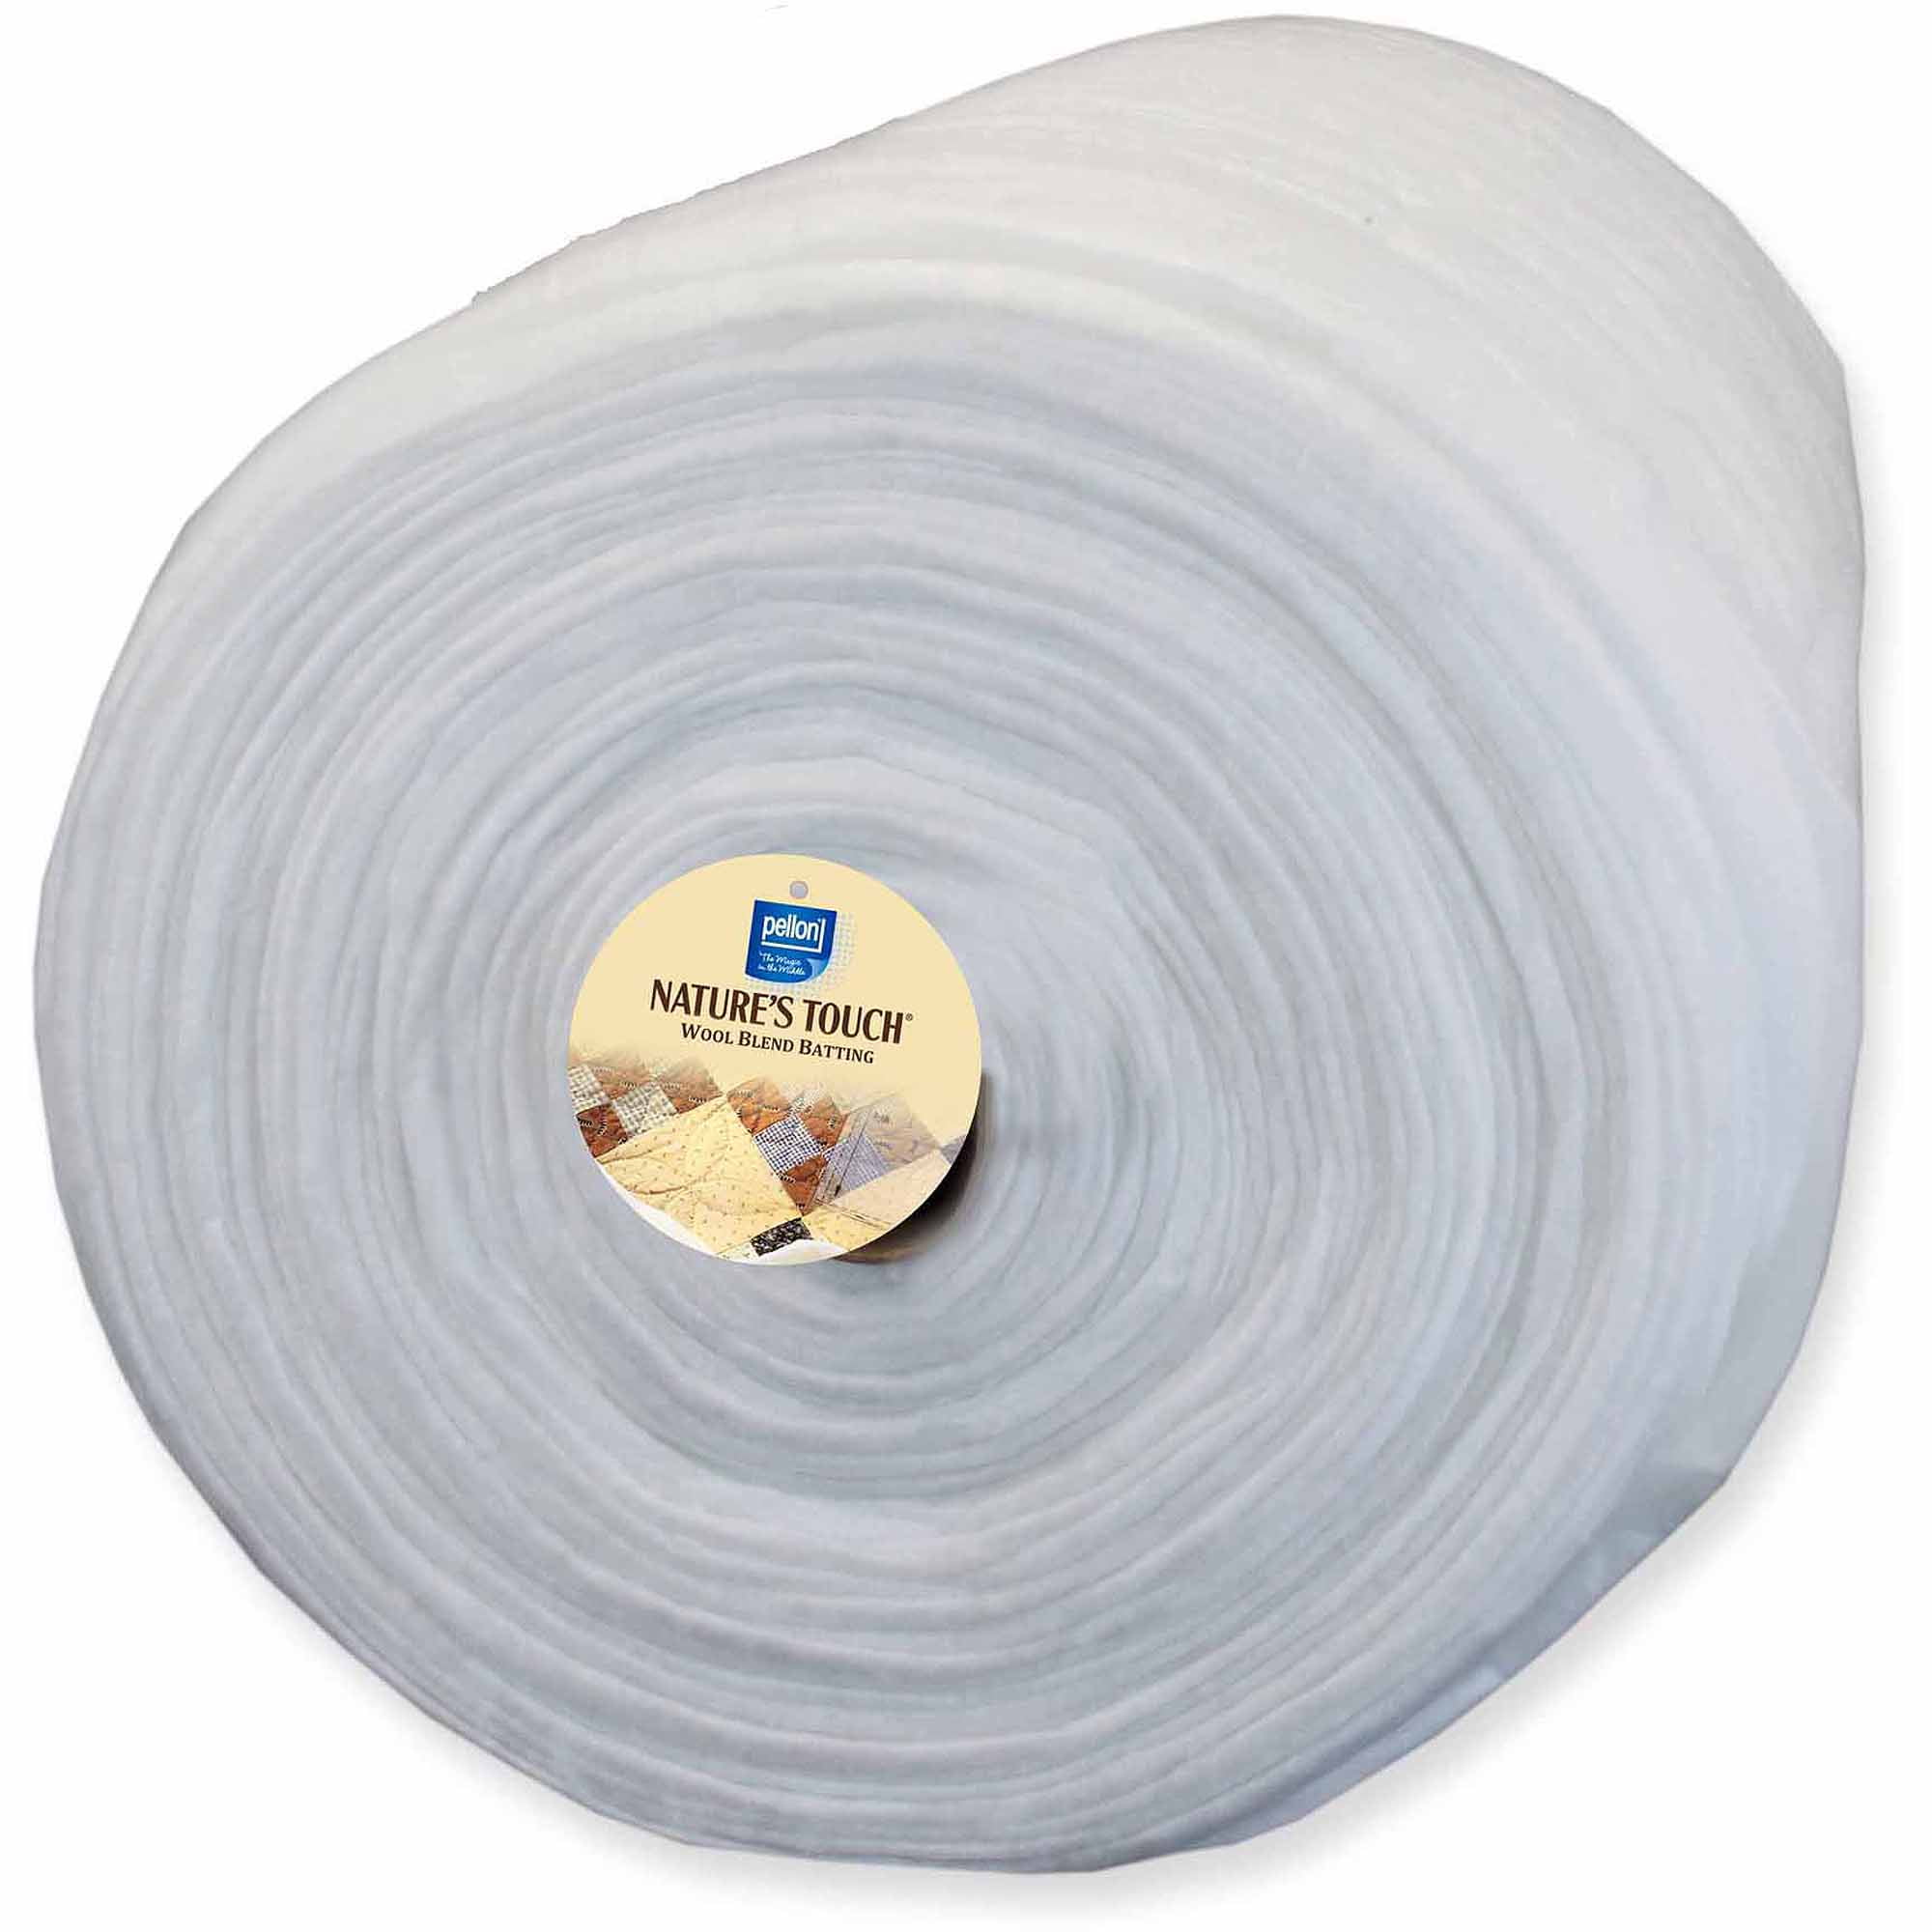 Pellon Natures Touch Wool Batting, 120 inch Wide, 30 Yard Roll, White